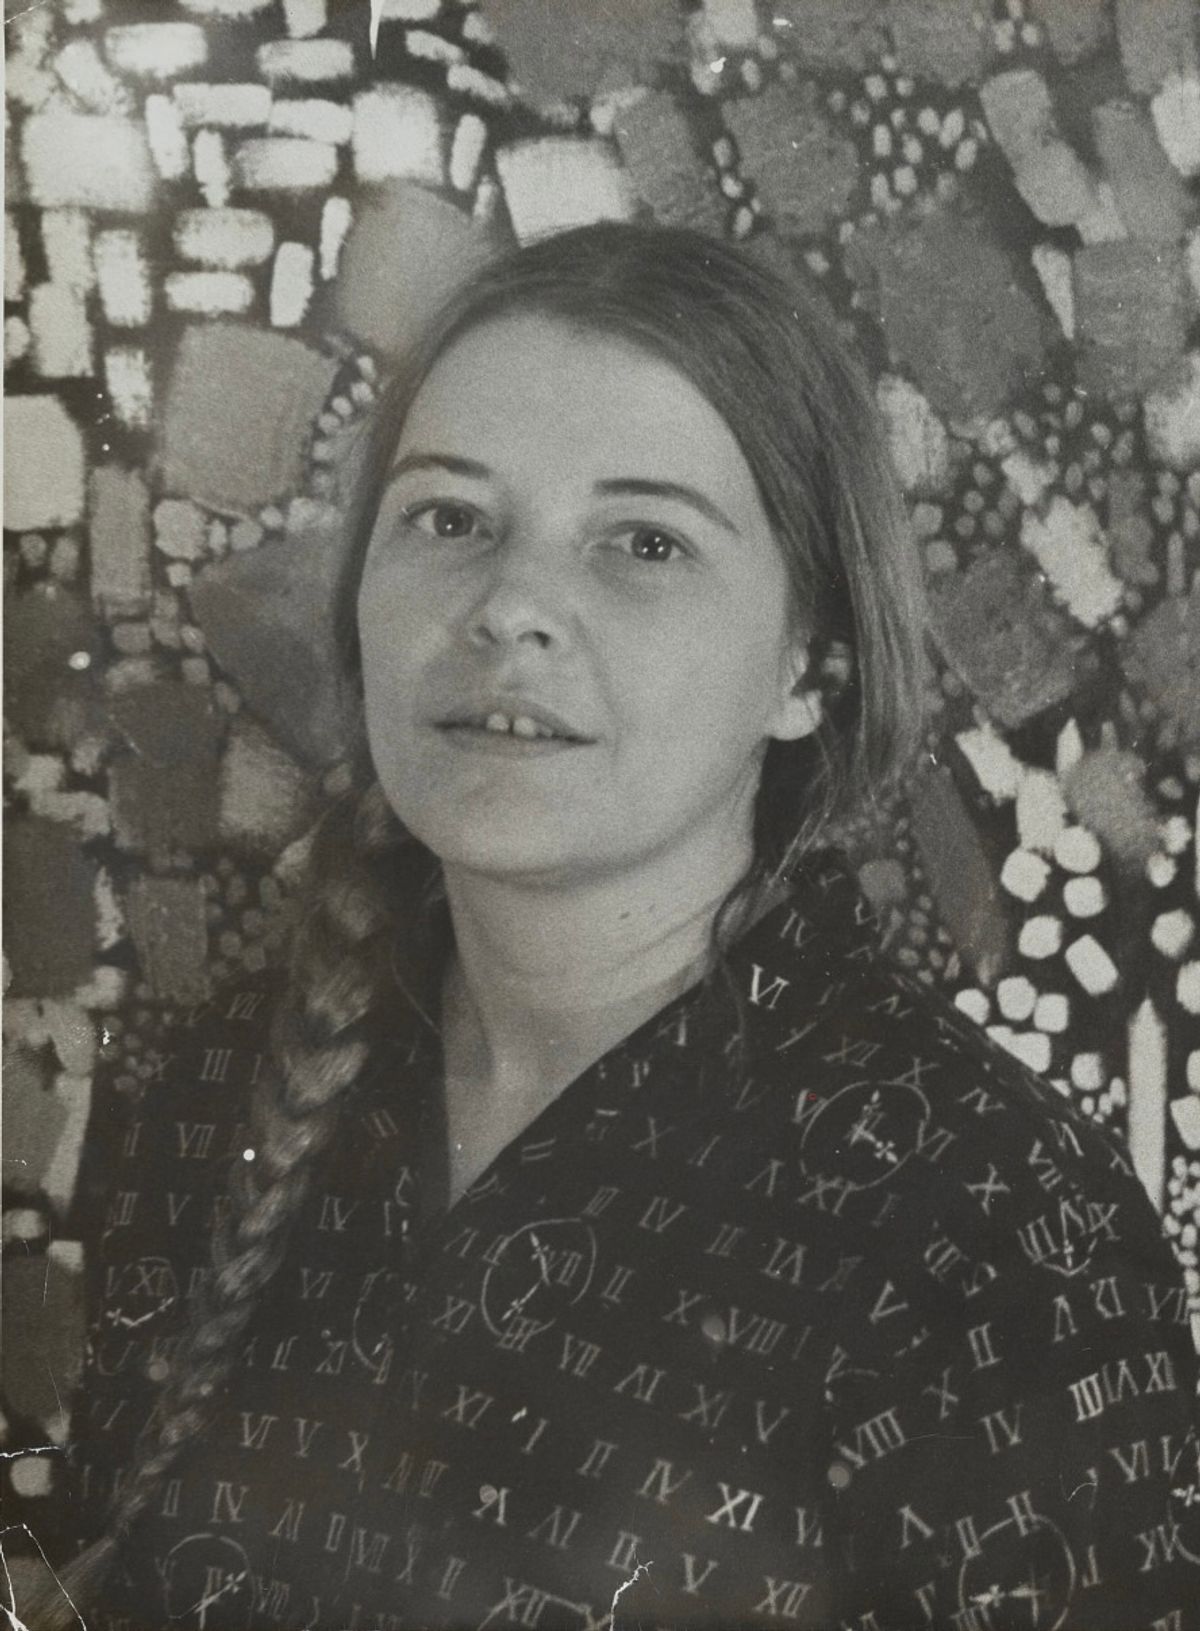 Lynne Drexler, pictured in front of one of her mosiac-like paintings. Courtesy of the Archives of American Art, Photo by Buckley Sander